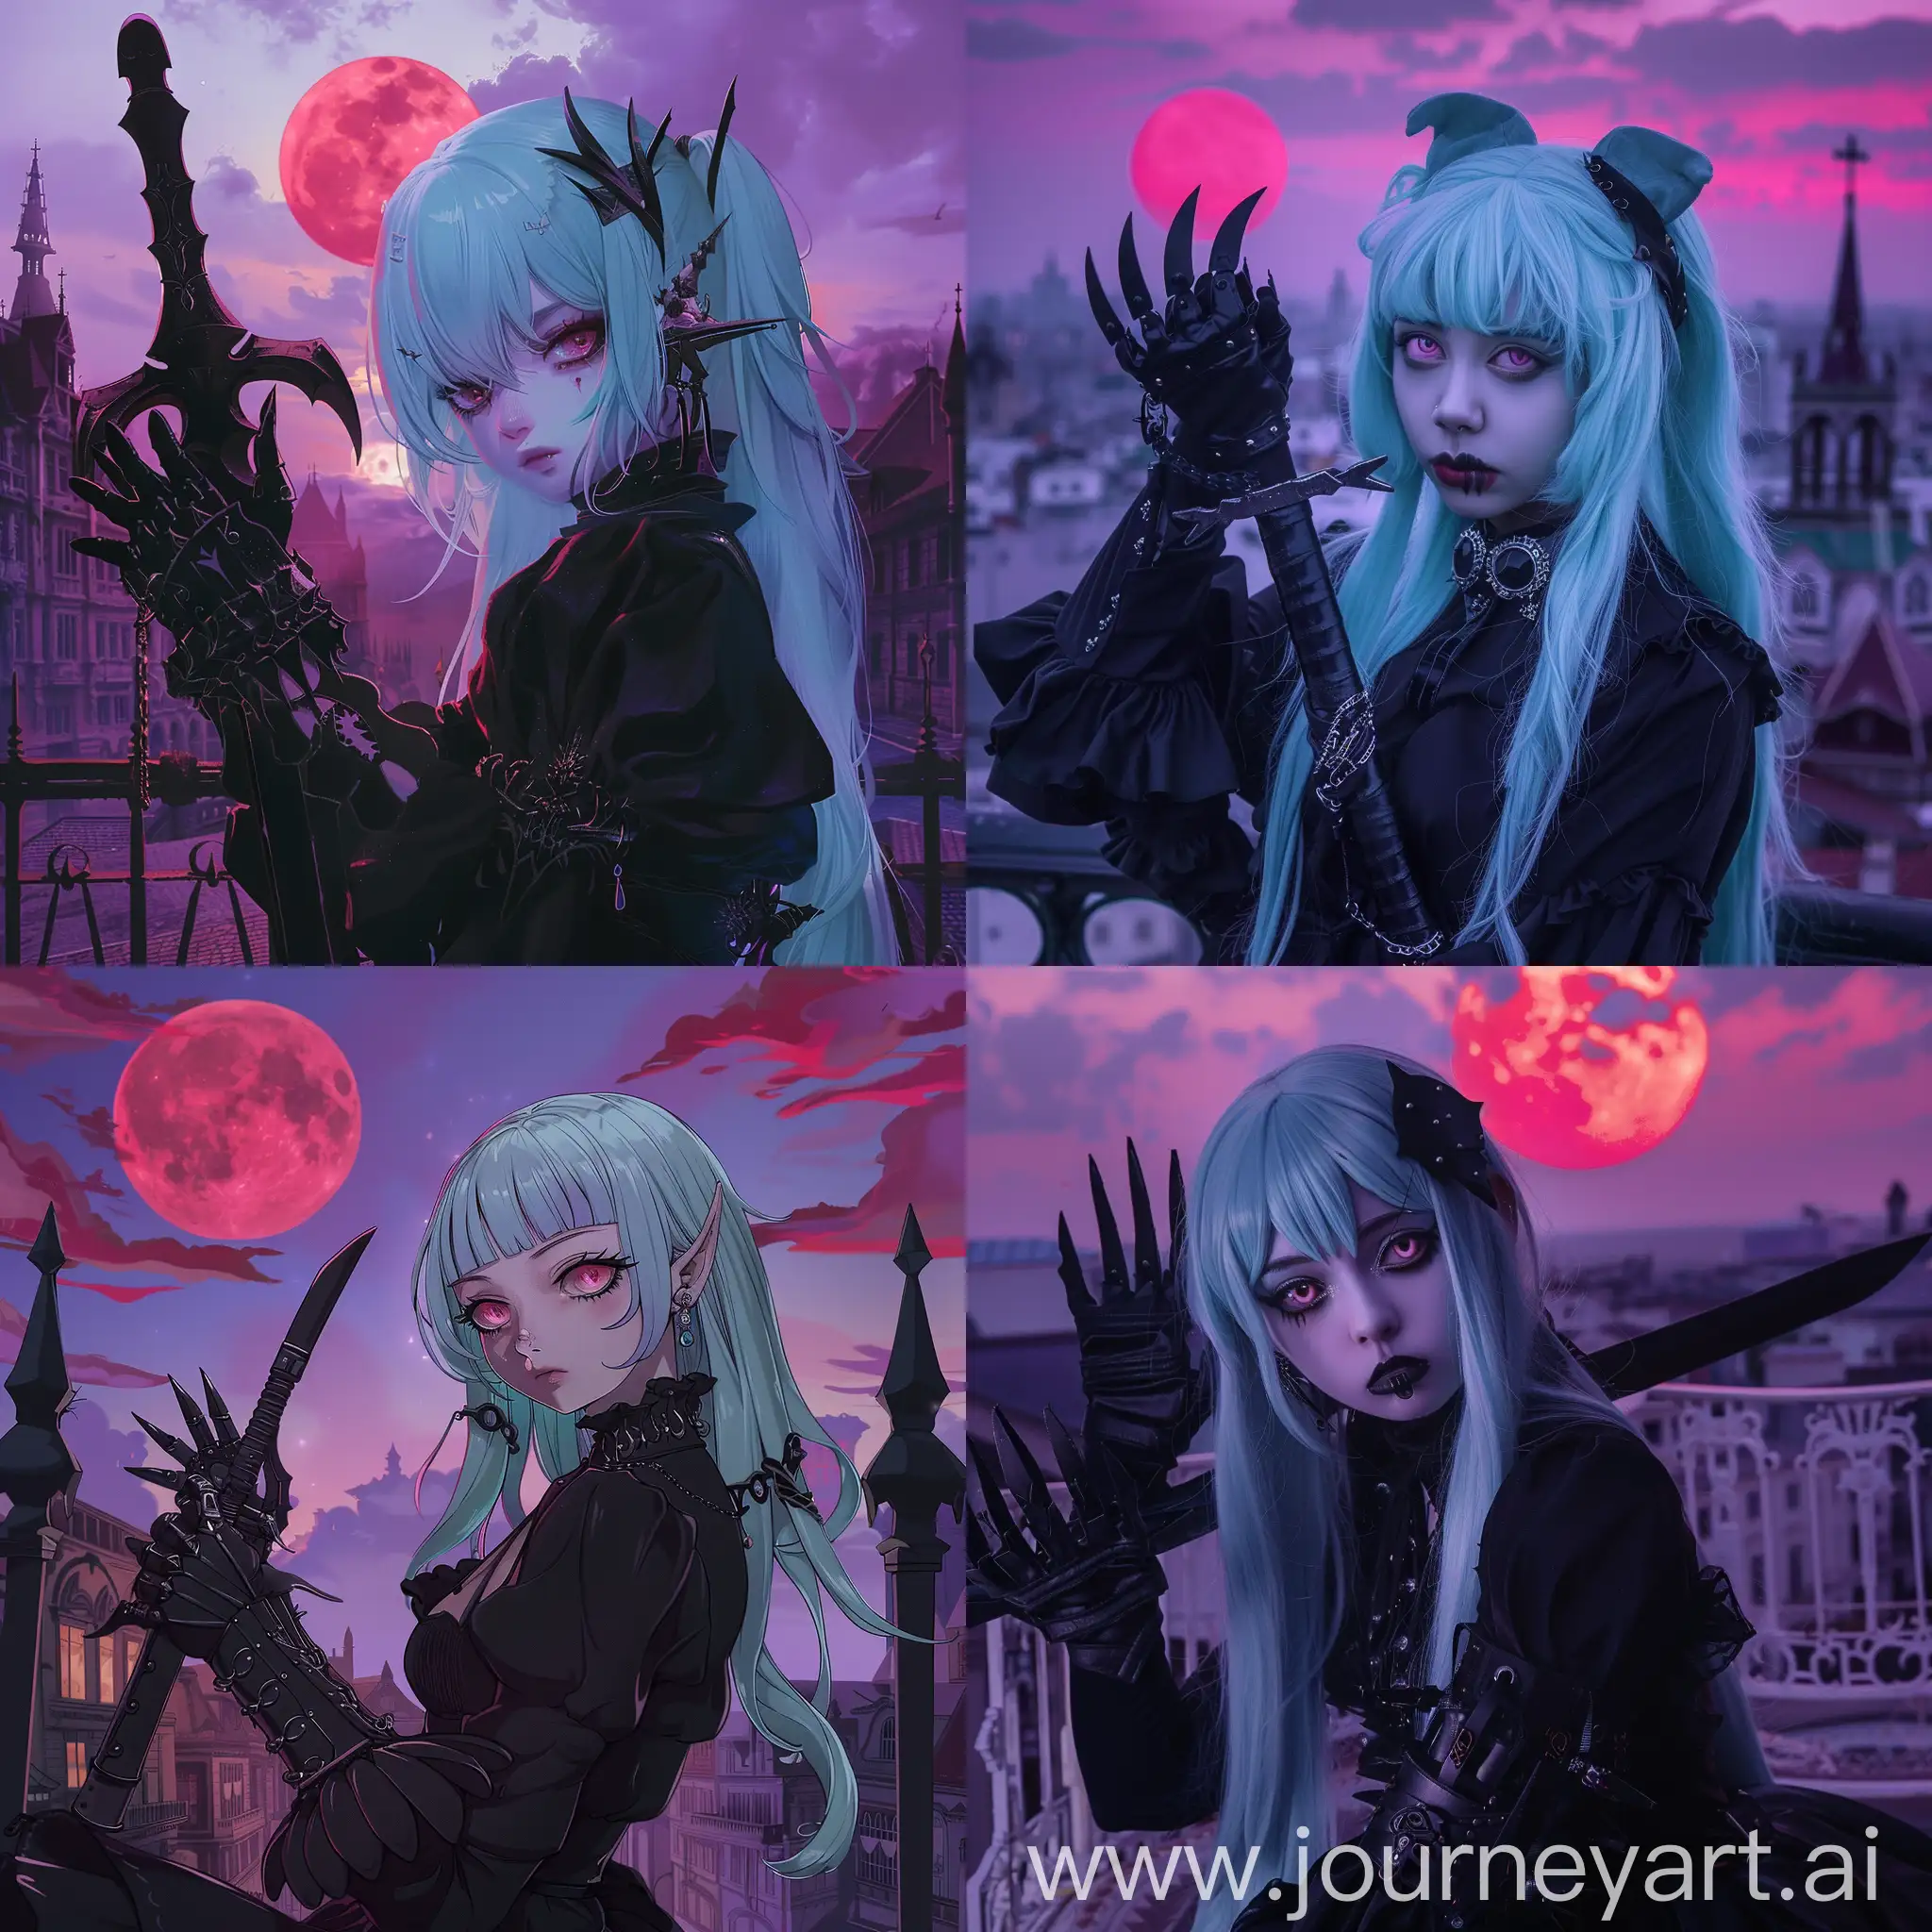 Dark fantasy, gothic horror, anime style, bloodborne & castlevania aesthetic.

Victorian city, purple sky, red moon.

Vampire girl, pale blue hair, pale pink eyes, black clothes, black metal claw gauntlets, black metal straight sword.